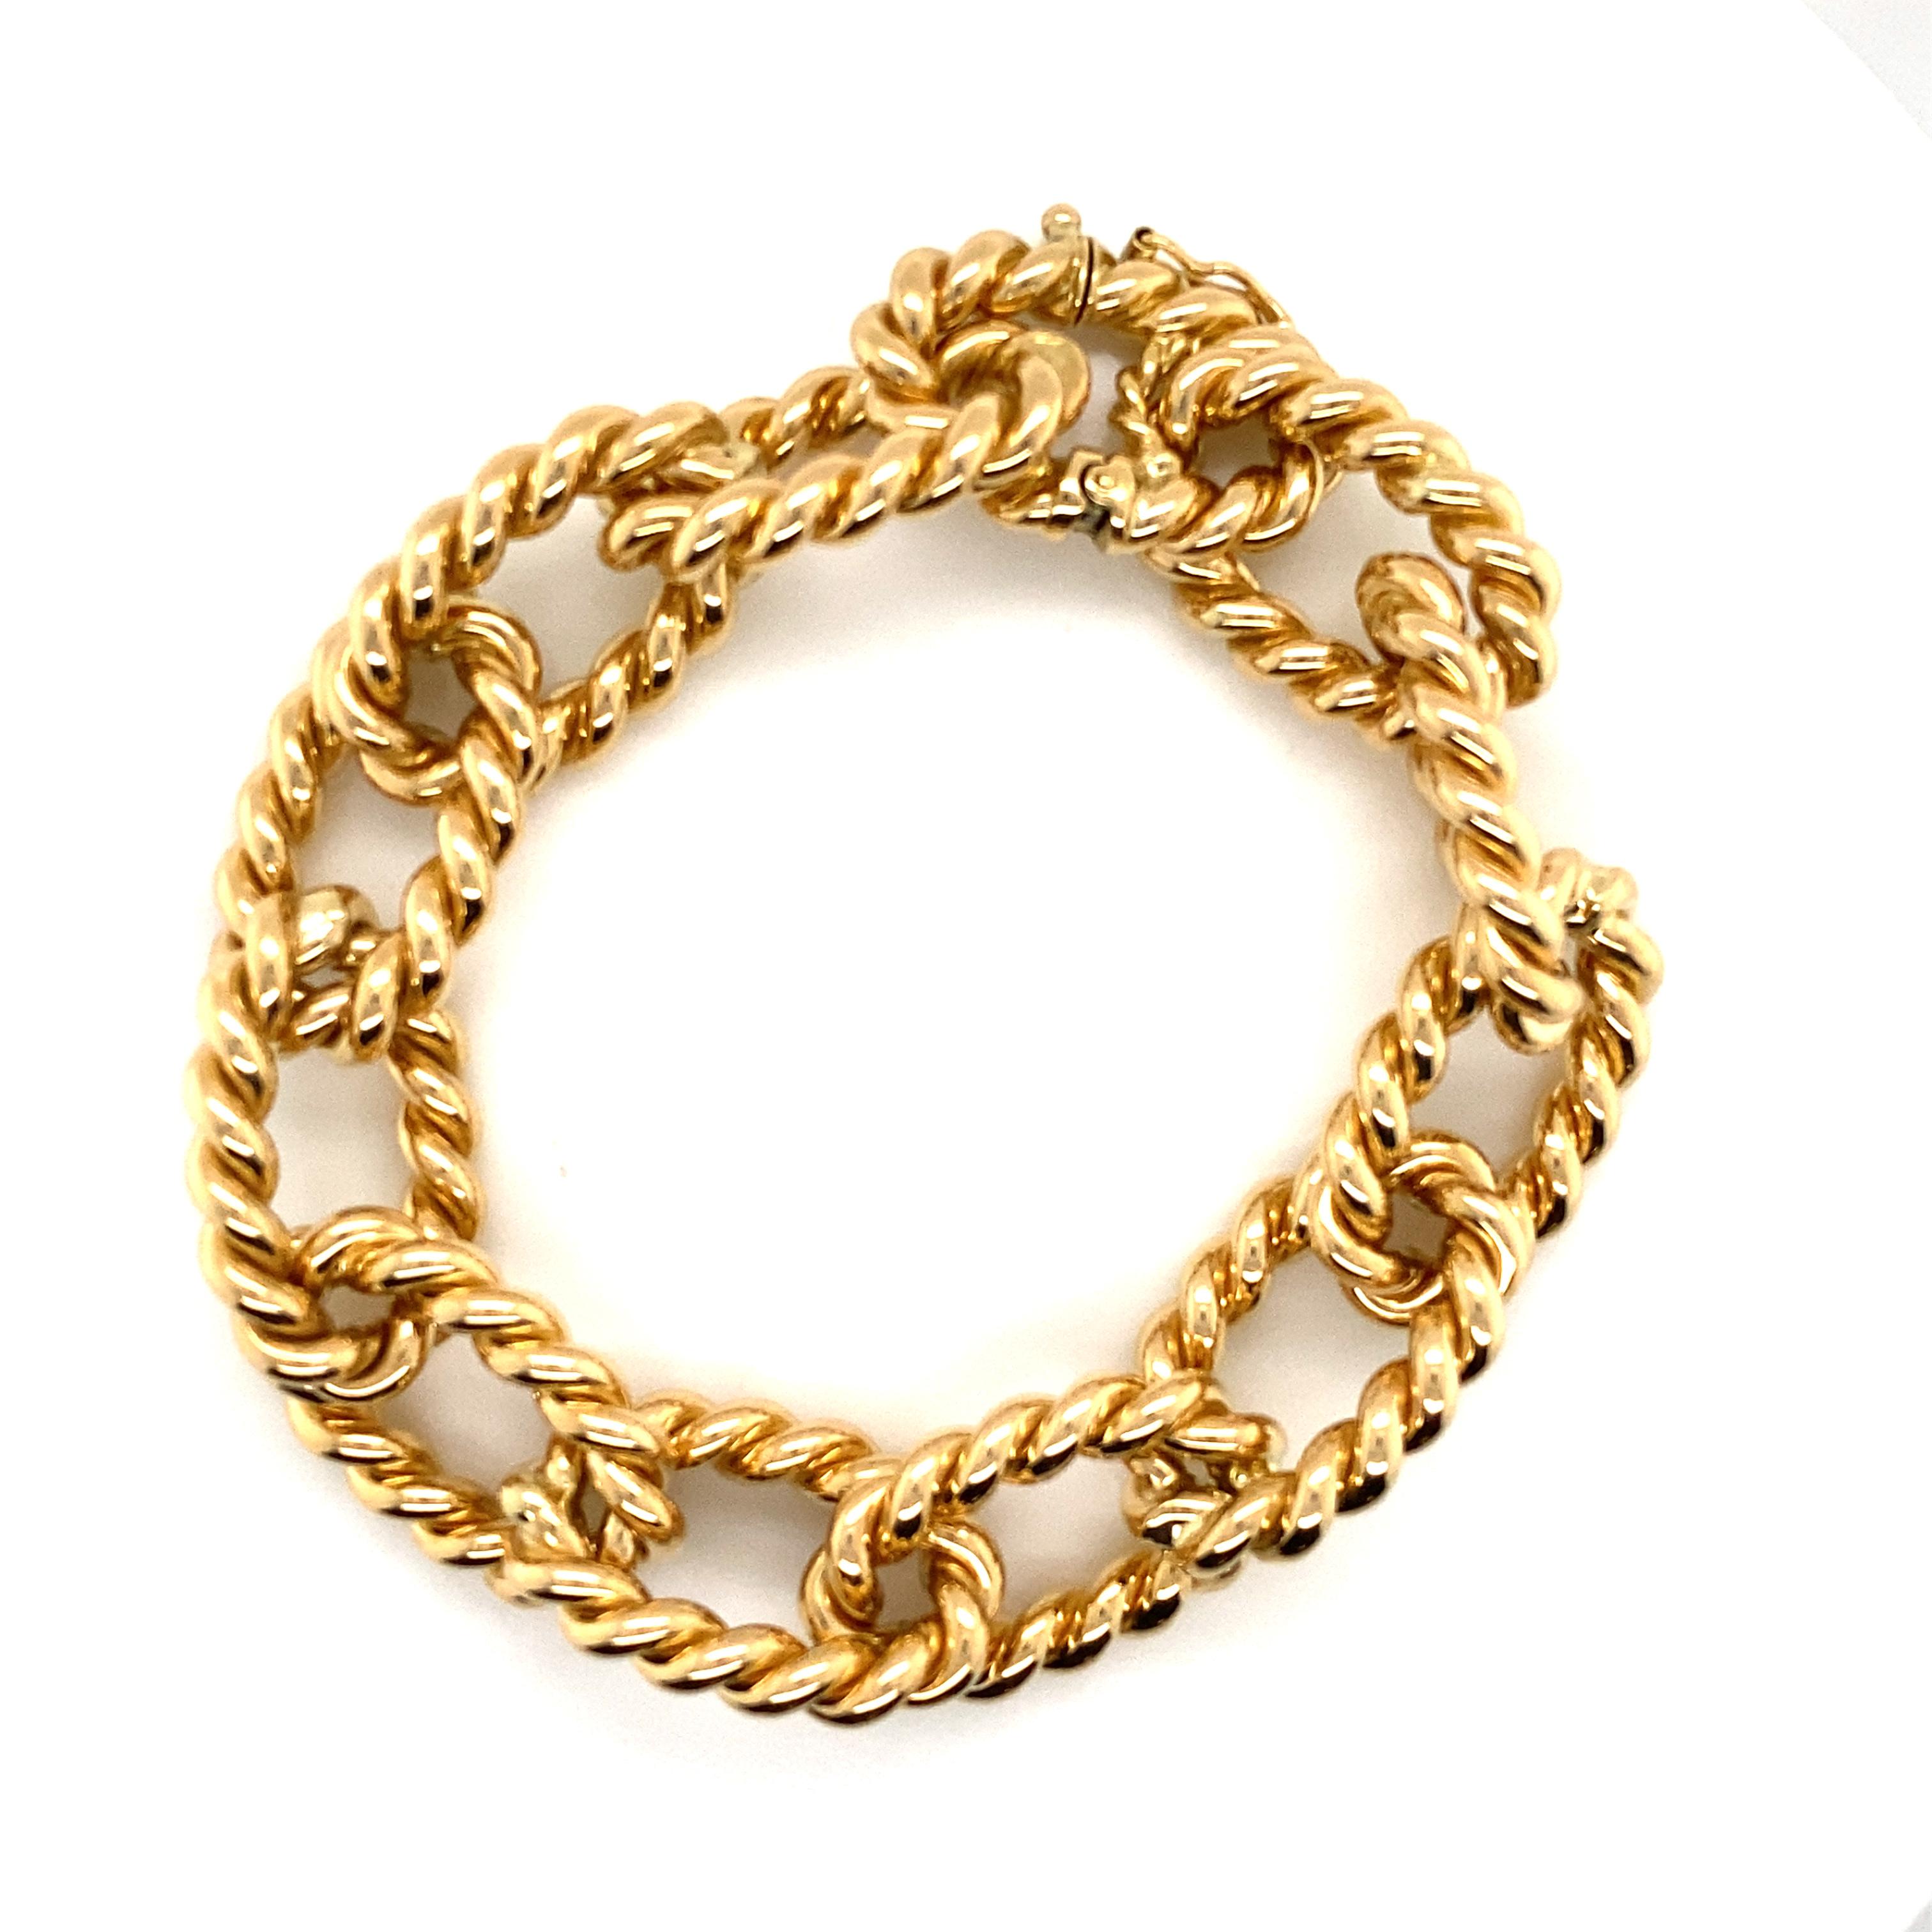 Gourmet Bracelet 18K Yellow Gold

Handmade twisted mesh with a spring clasp and double safety clasp to ensure its safety at the wrist.
length : 22 cm 